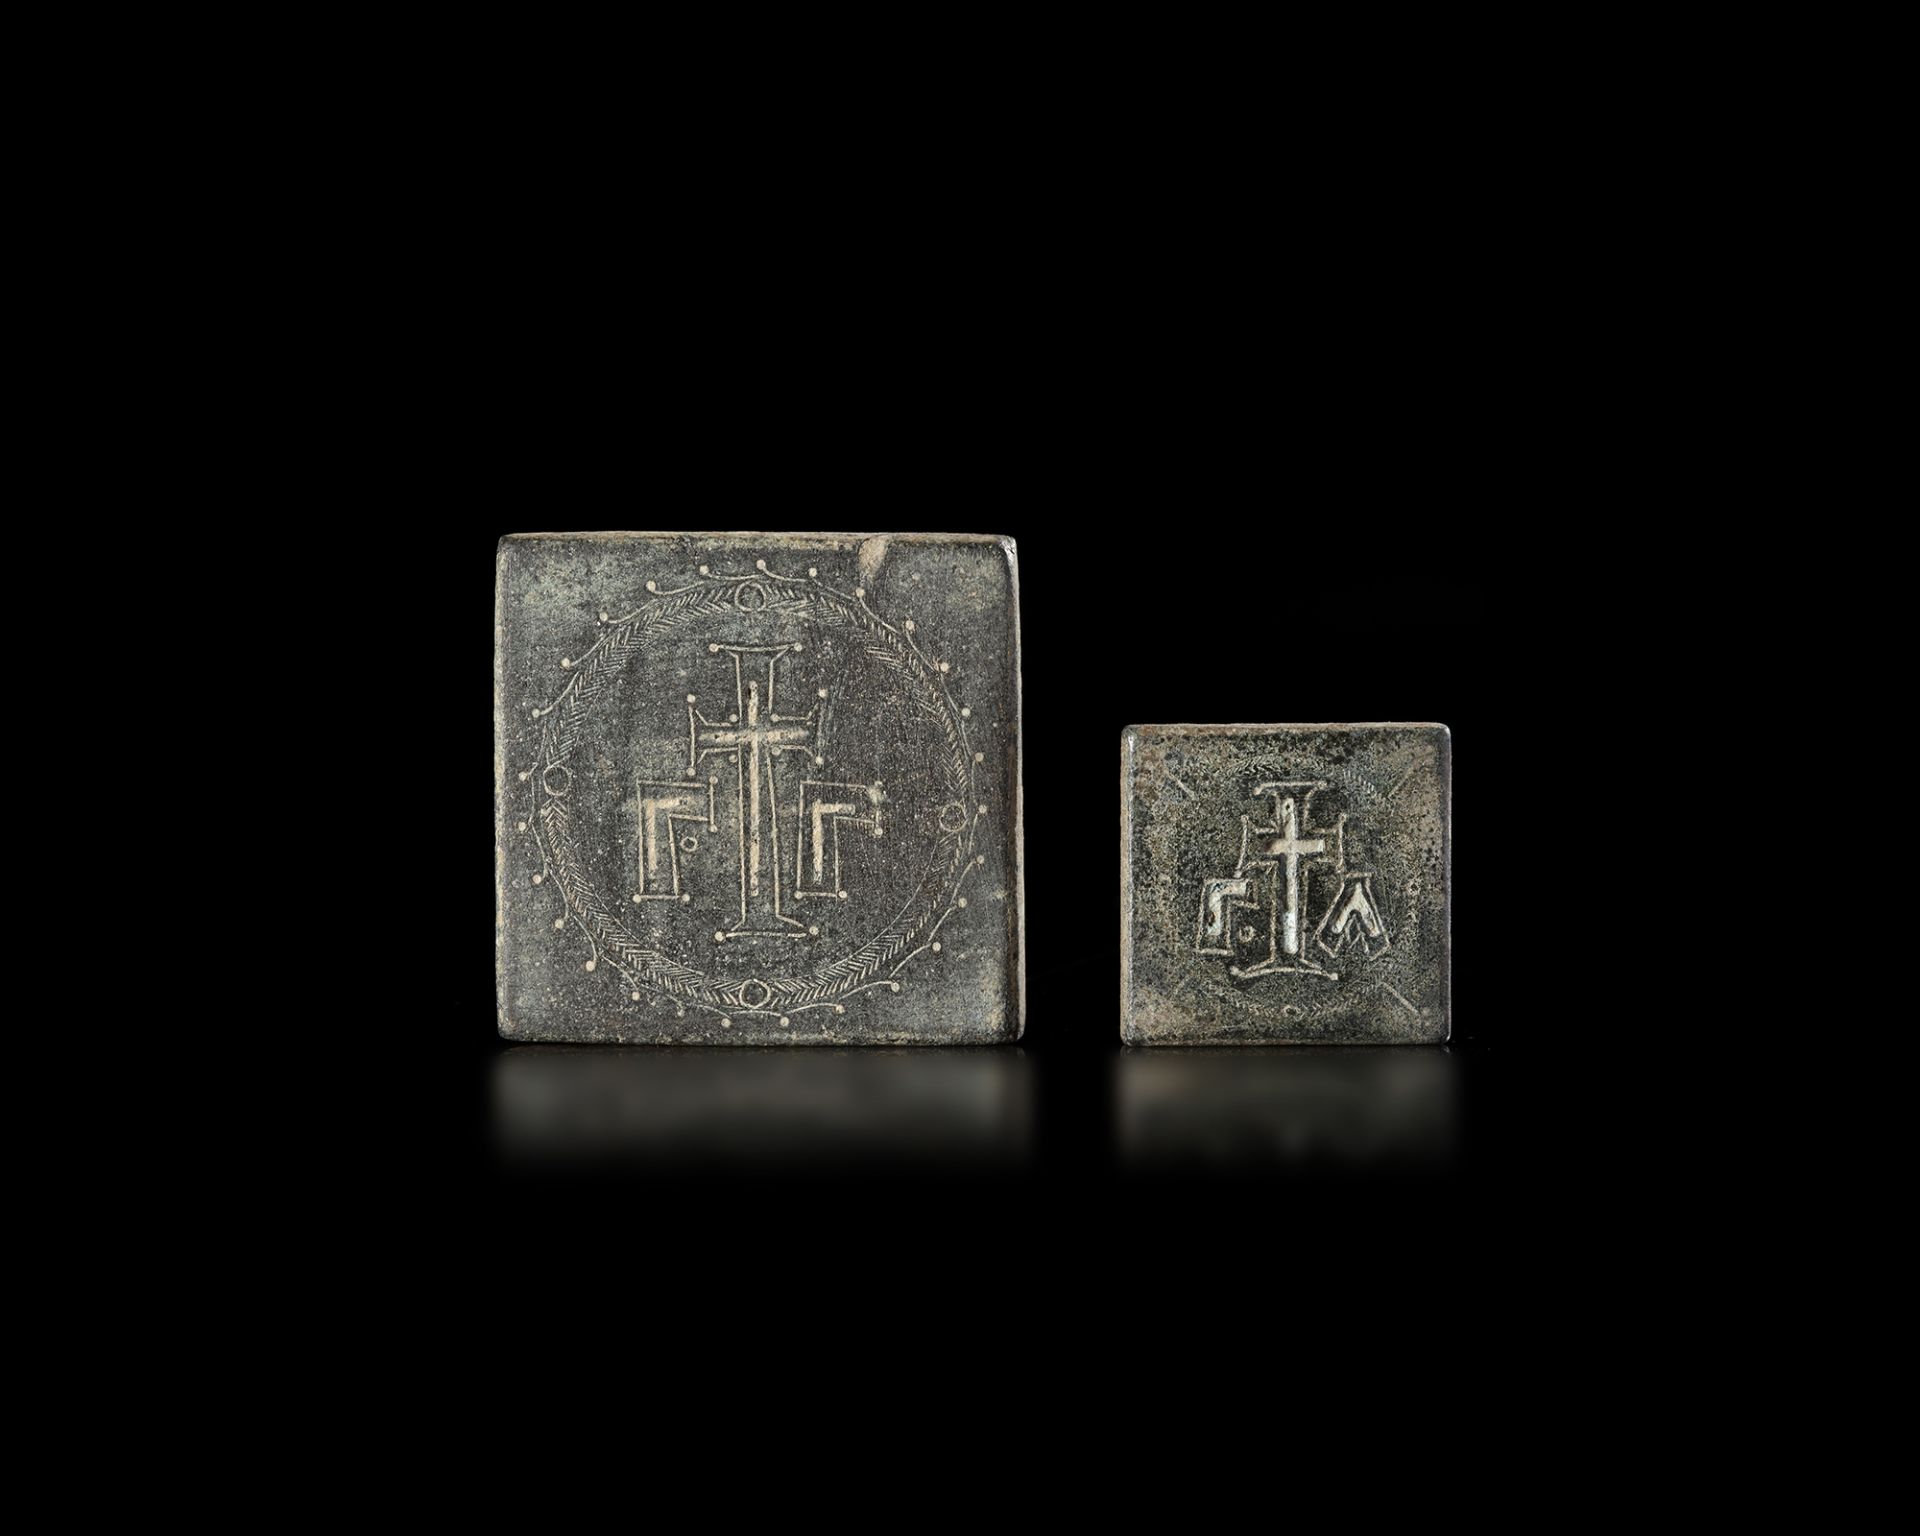 TWO BYZANTINE BRONZE COMMERCIAL WEIGHTS, 5TH-7TH CENTURY AD